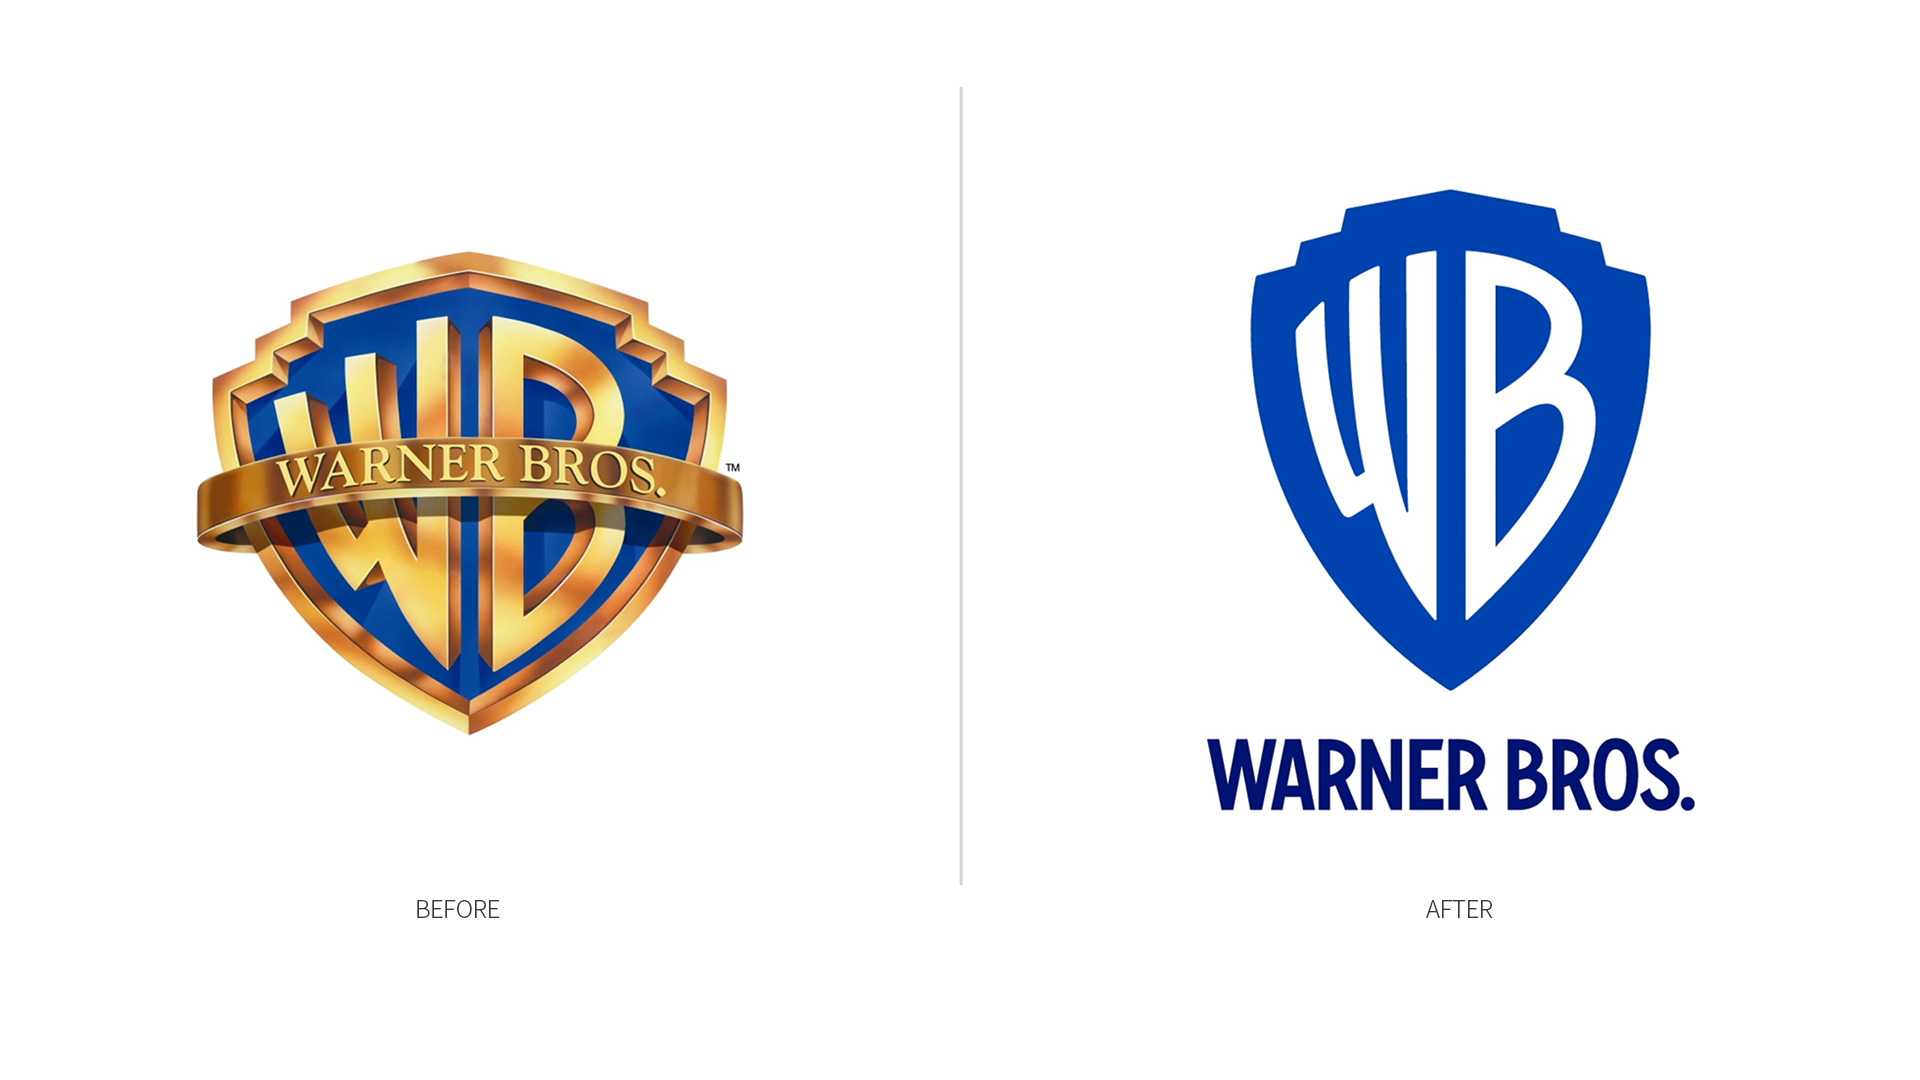 Over three years, Pentagram redesigned the iconic Warner Bros logo and  identity. By making small tweaks to a well-establi…